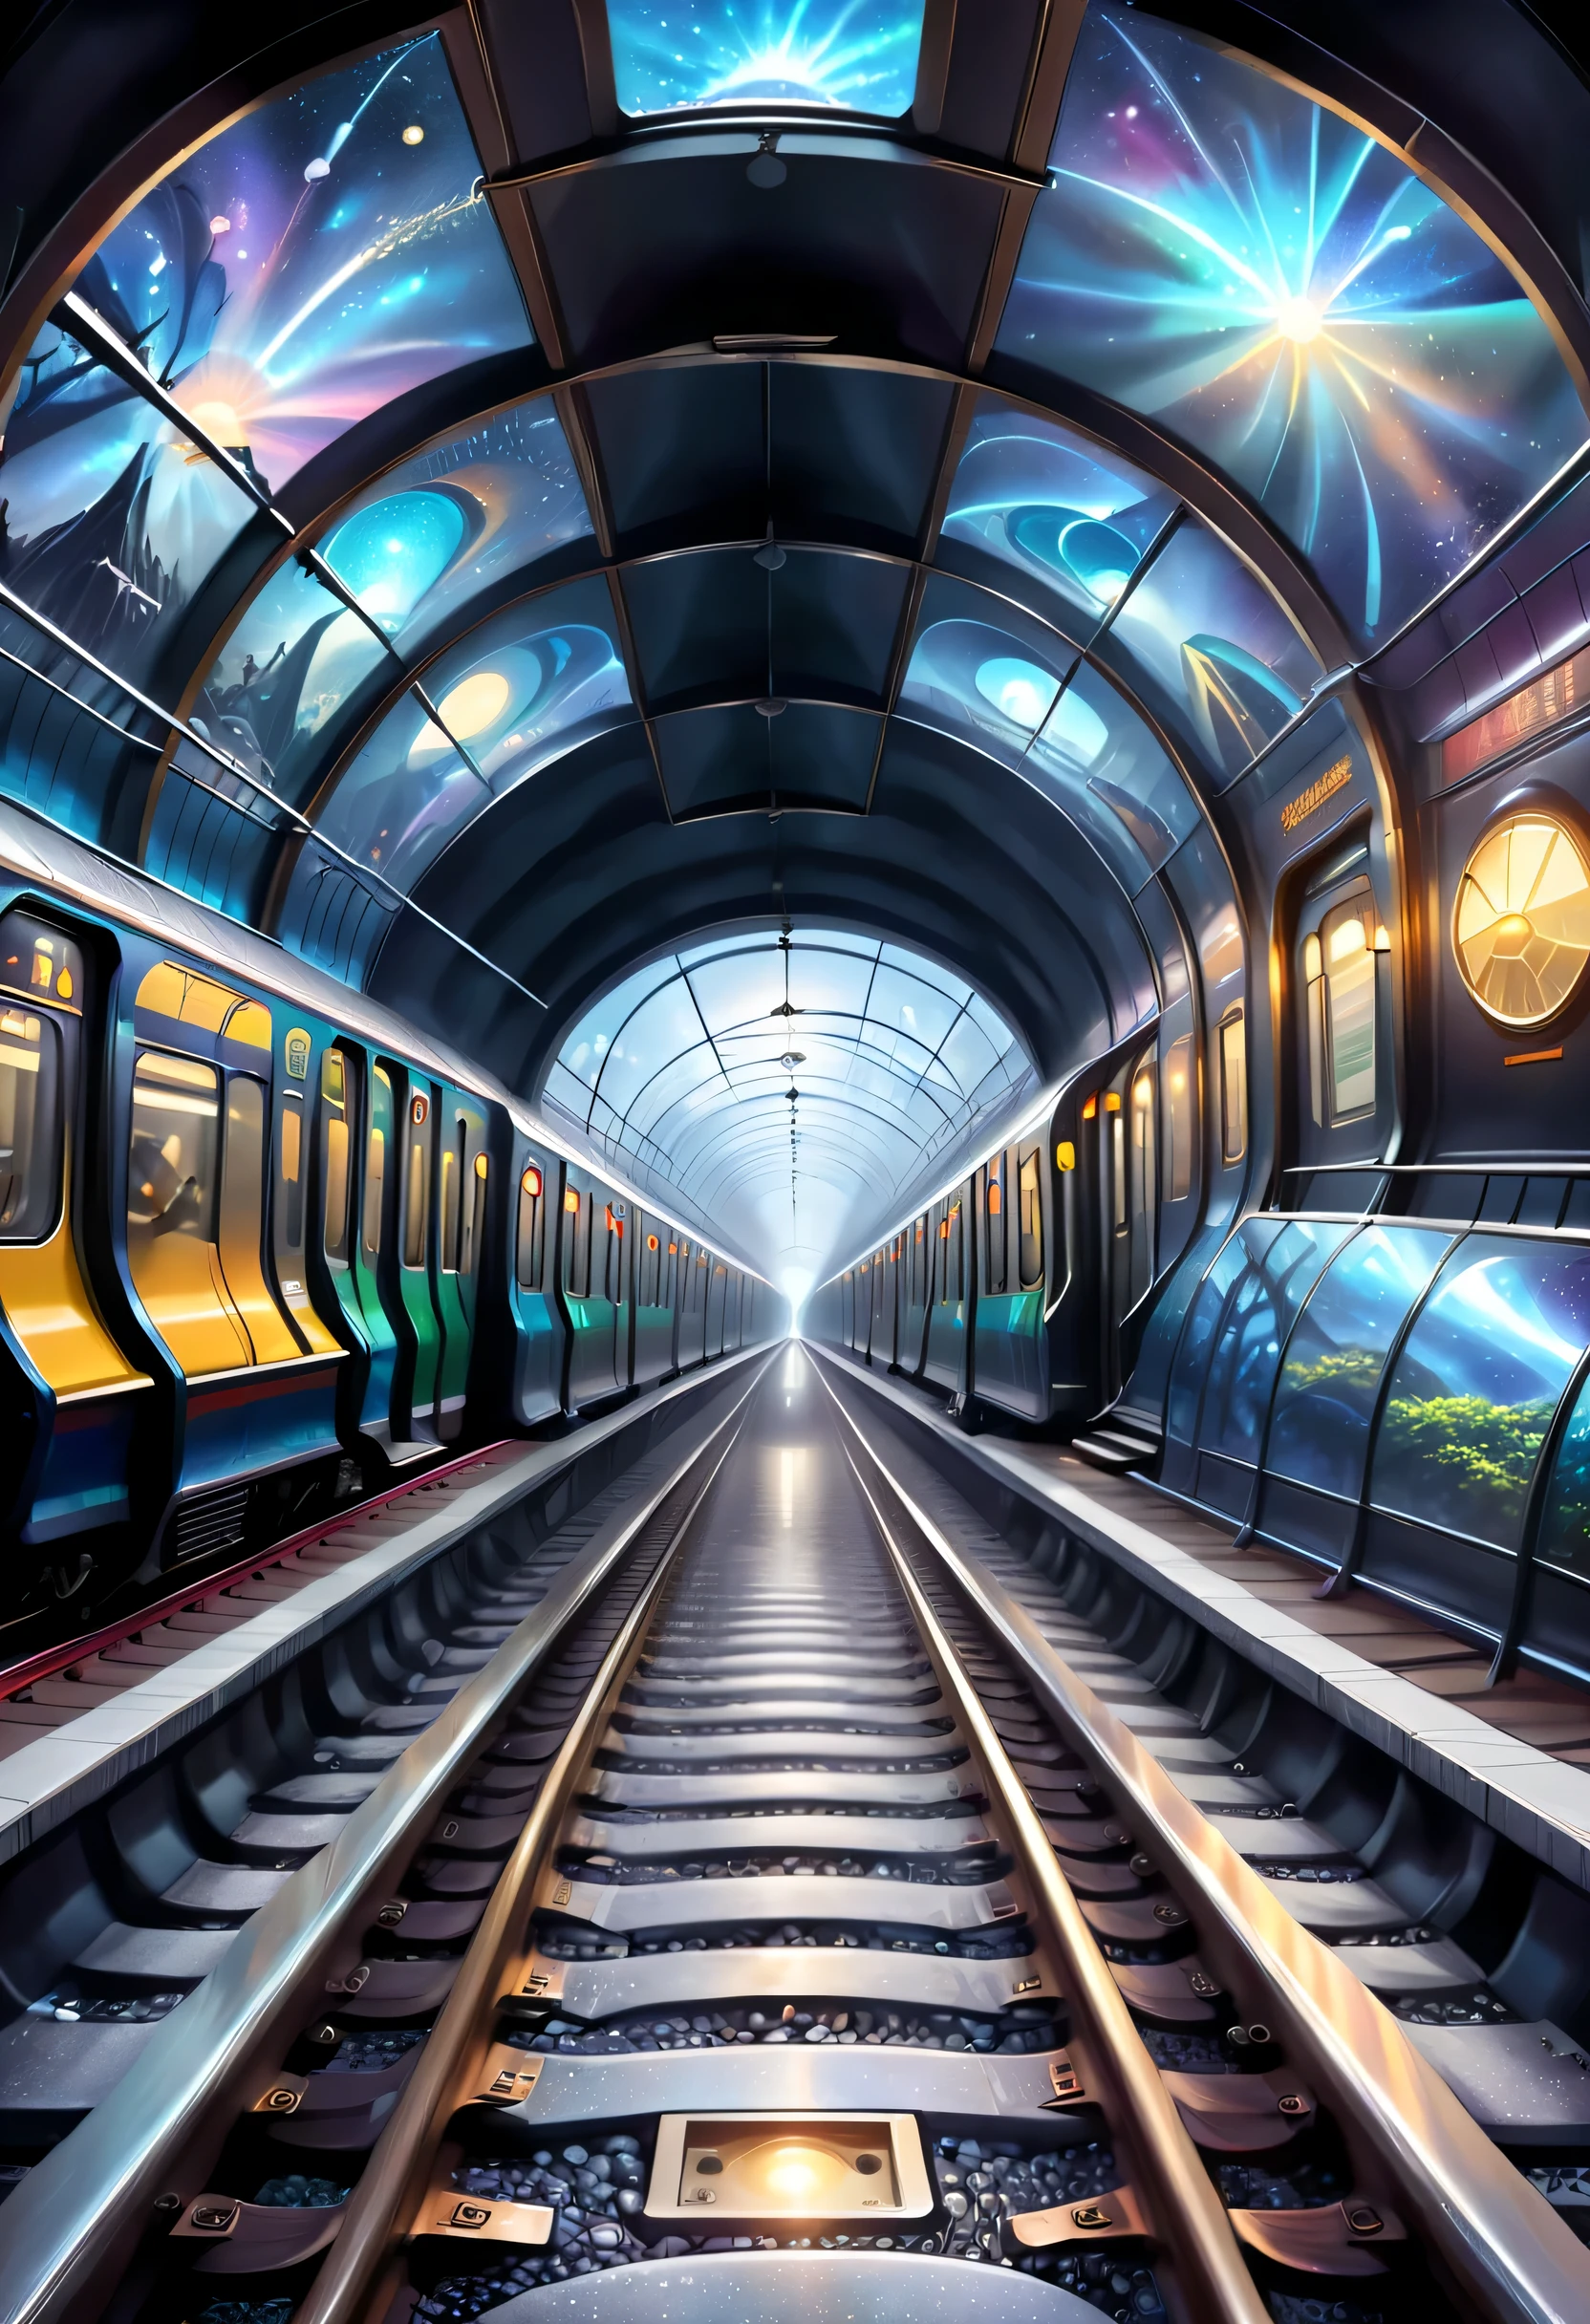 It depicts the connection of subway tracks to a different dimensional space。It is possible to draw a subway tunnel，One of the sections leads to a different dimensional world，Illustrations can show peculiar landscapeysterious visions and passengers from different dimensions。The Star Dome train serves as a passage between the normal world and the other dimension，Presents a mysterious and mesmerizing atmosphere。